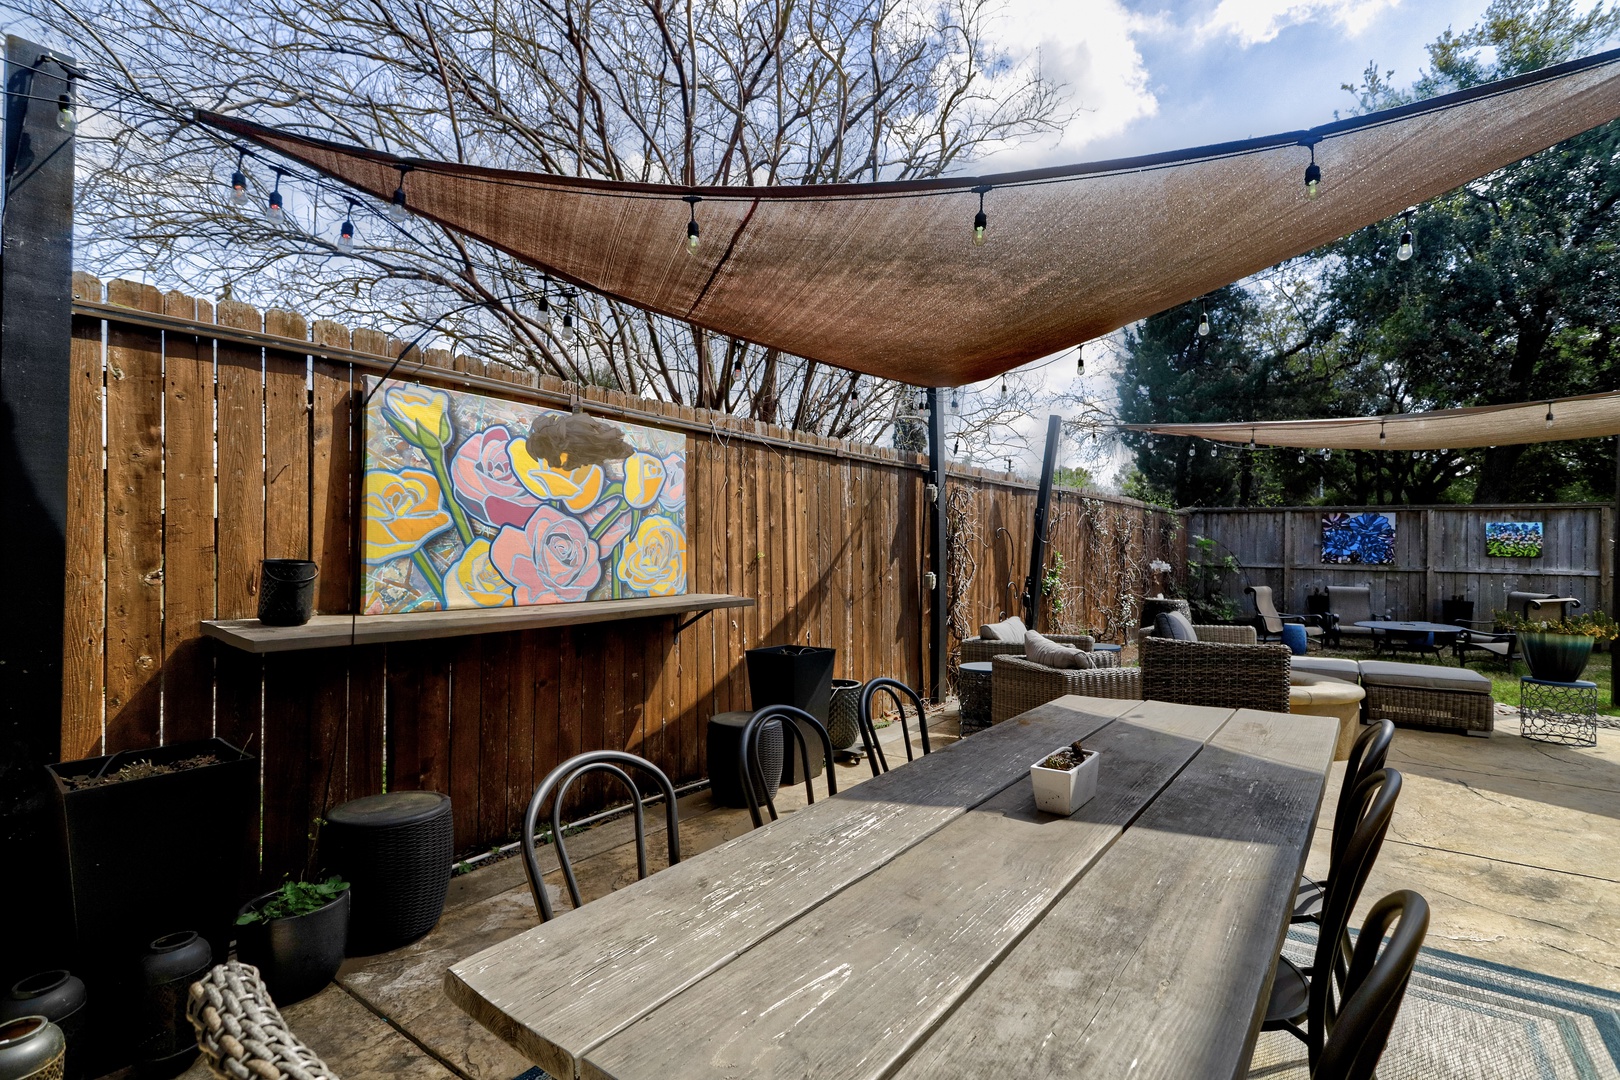 Lounge the day away or dine alfresco on the shaded patio